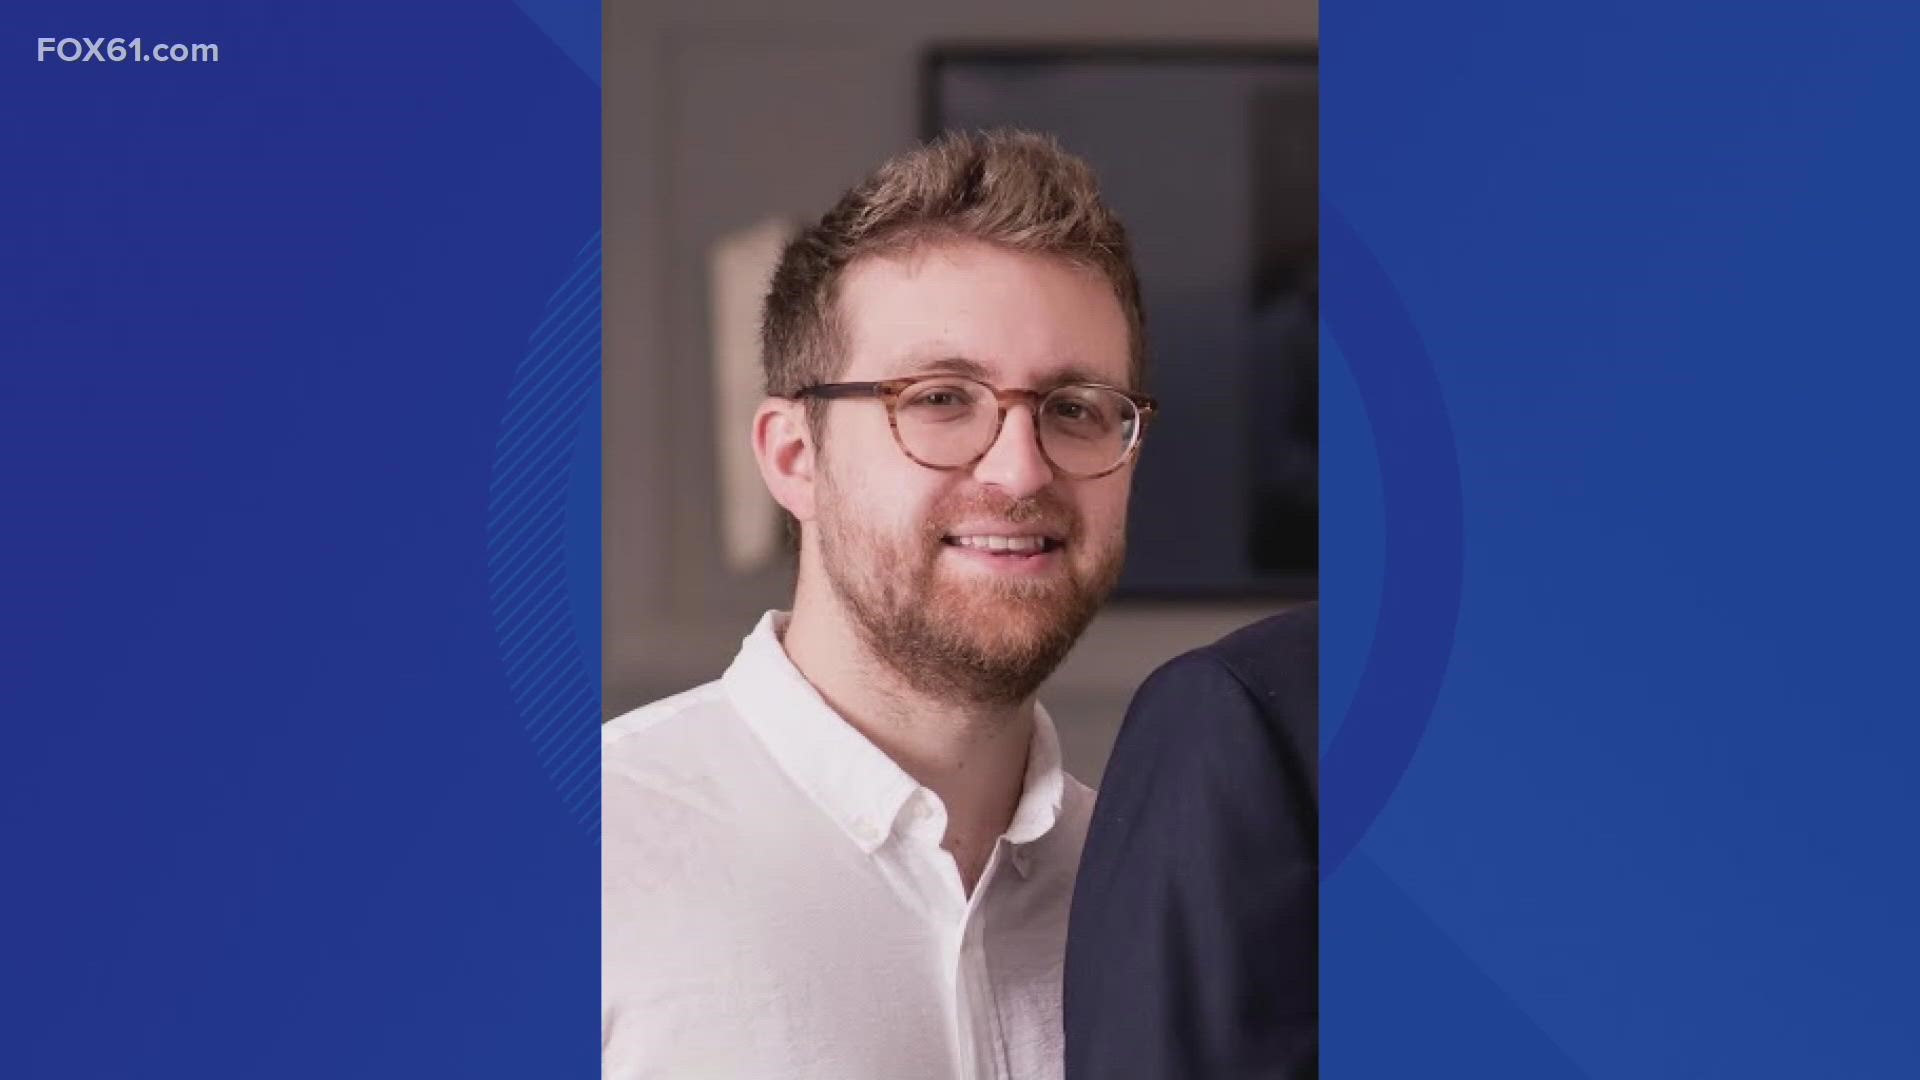 Elan Ganeles, 27, a West Hartford native, was in Israel for a wedding, according to the Jewish Federation of Greater Hartford.